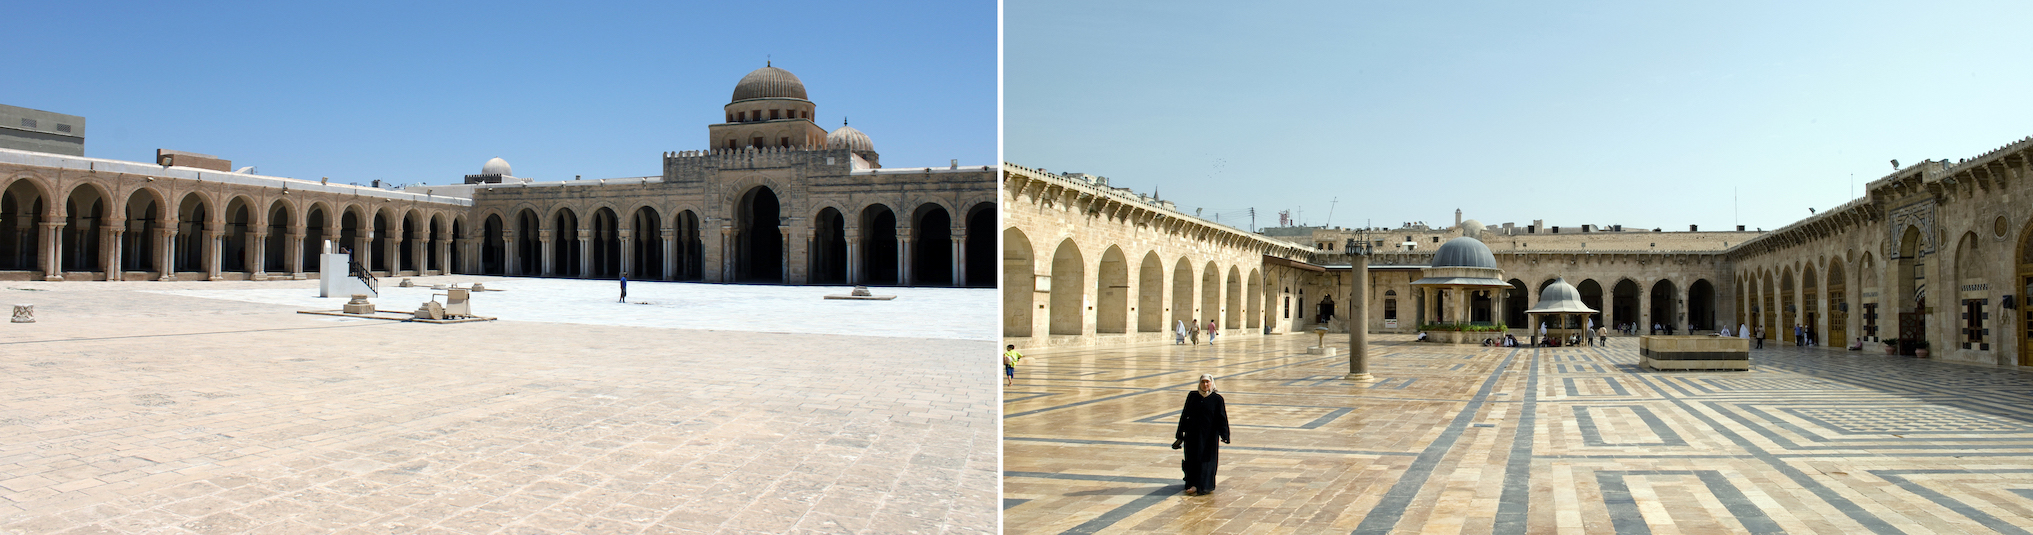 The Great Mosques of Kairouan, Tunisia, 9th century (left), and Aleppo, Syria, 11th-14th century (right). (Photos: Sean Leatherbury and Ross Burns/Manar al-Athar)